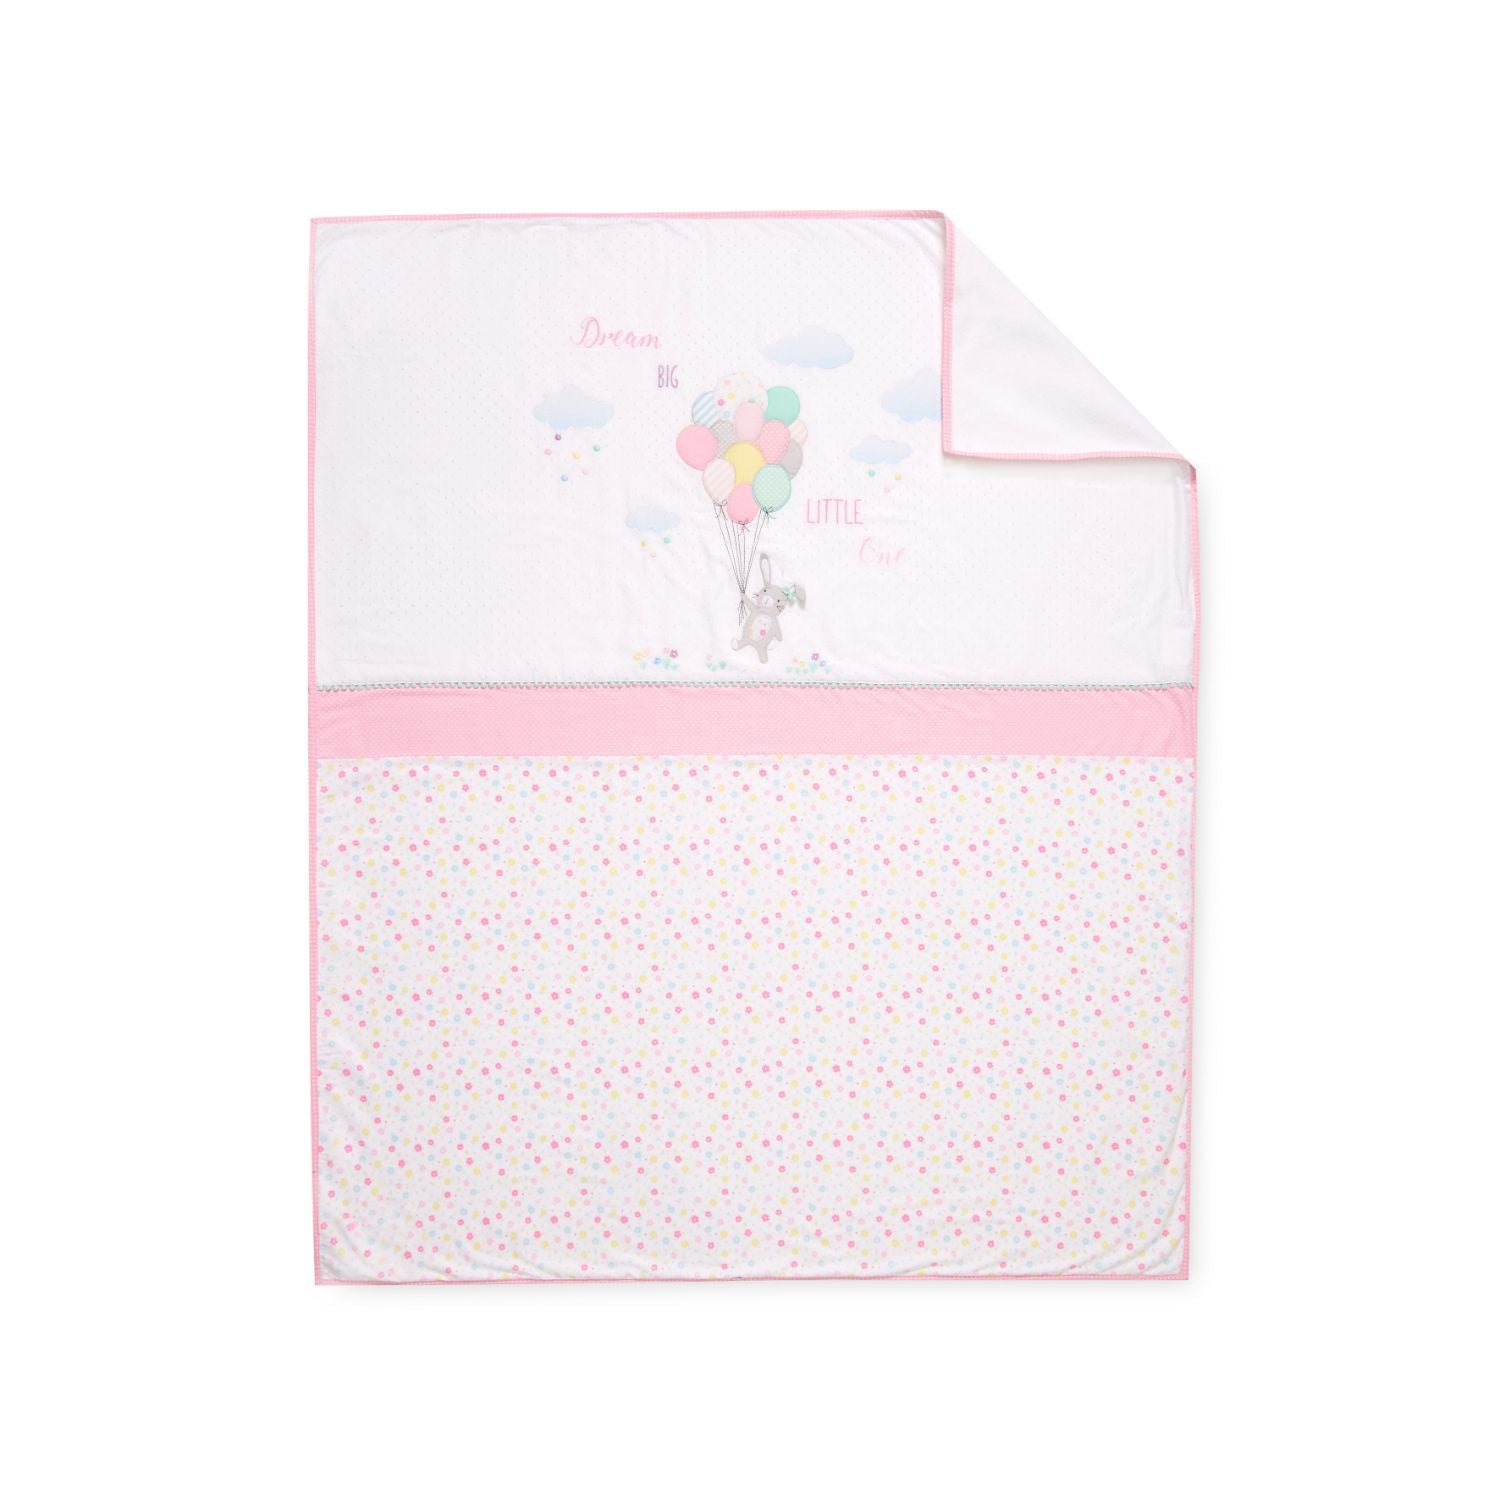 Mothercare Confetti Party Bed In Bag